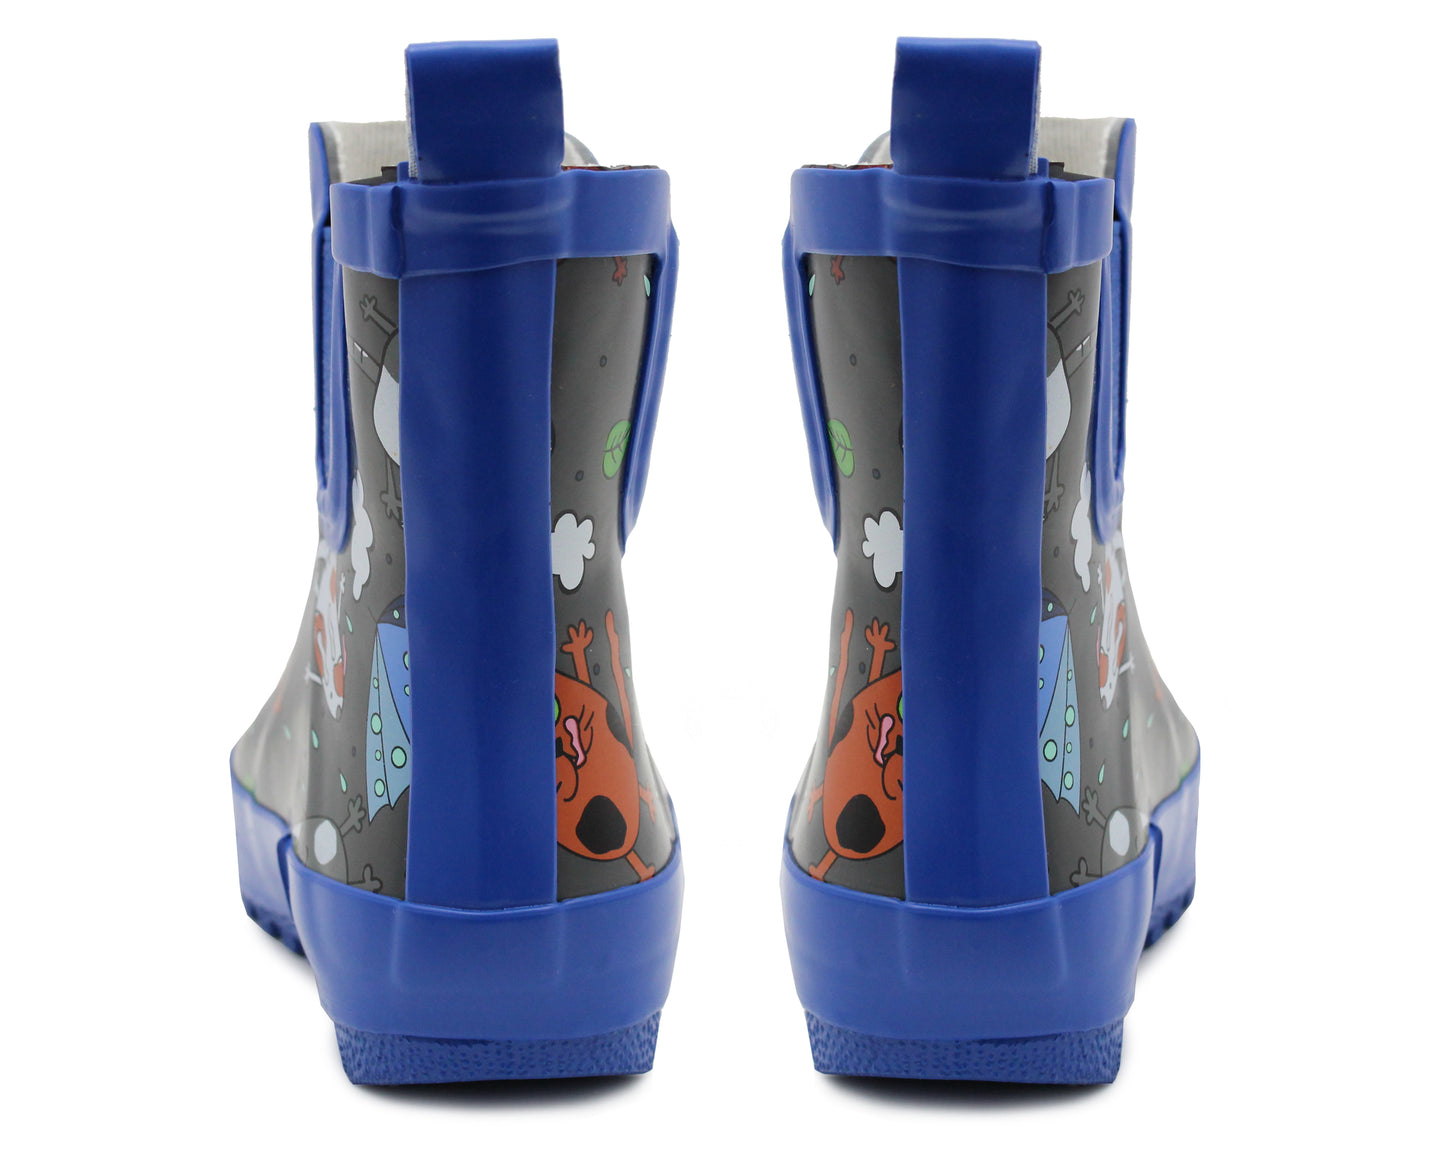 Boys Kids Wellington Boots Toddlers Infant Ankle Boot Wellies Elastic Waterproof Puddle Rain Boots